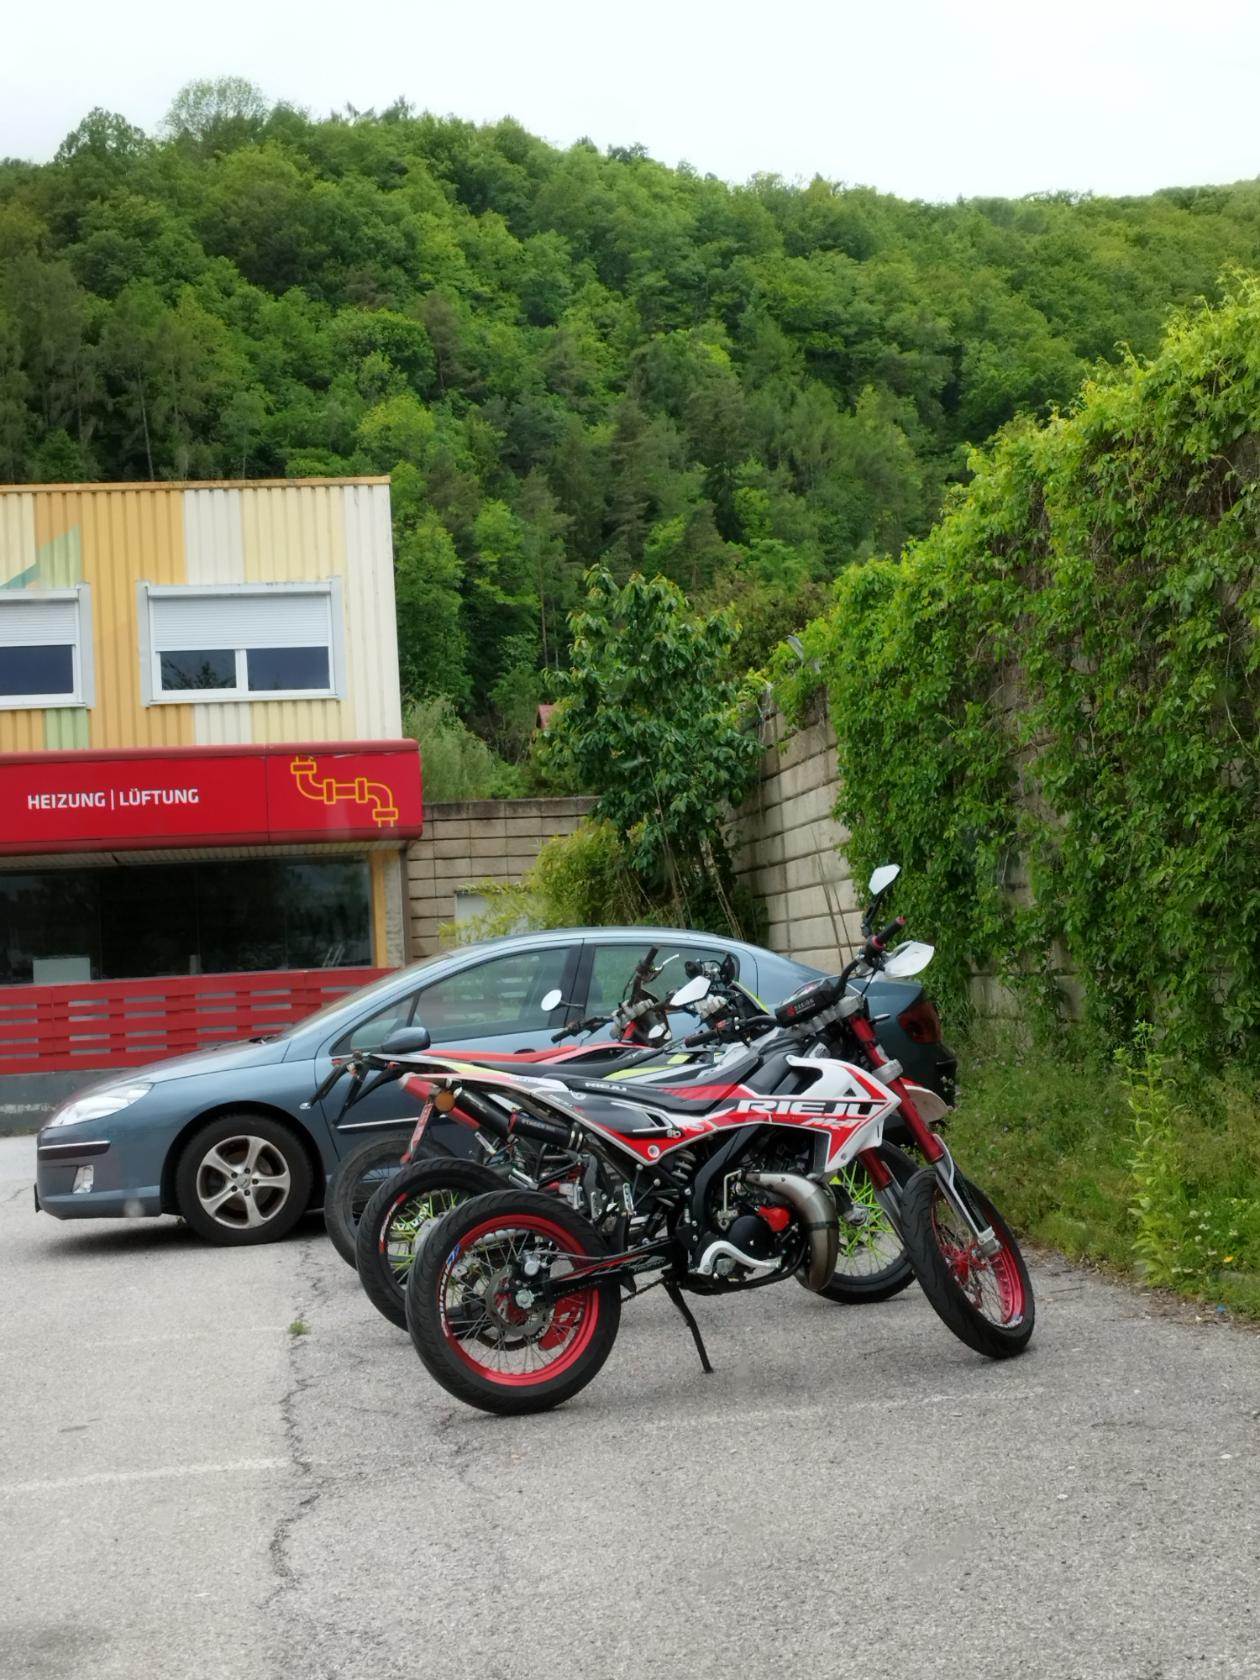 Moped-Tuning / Österreich